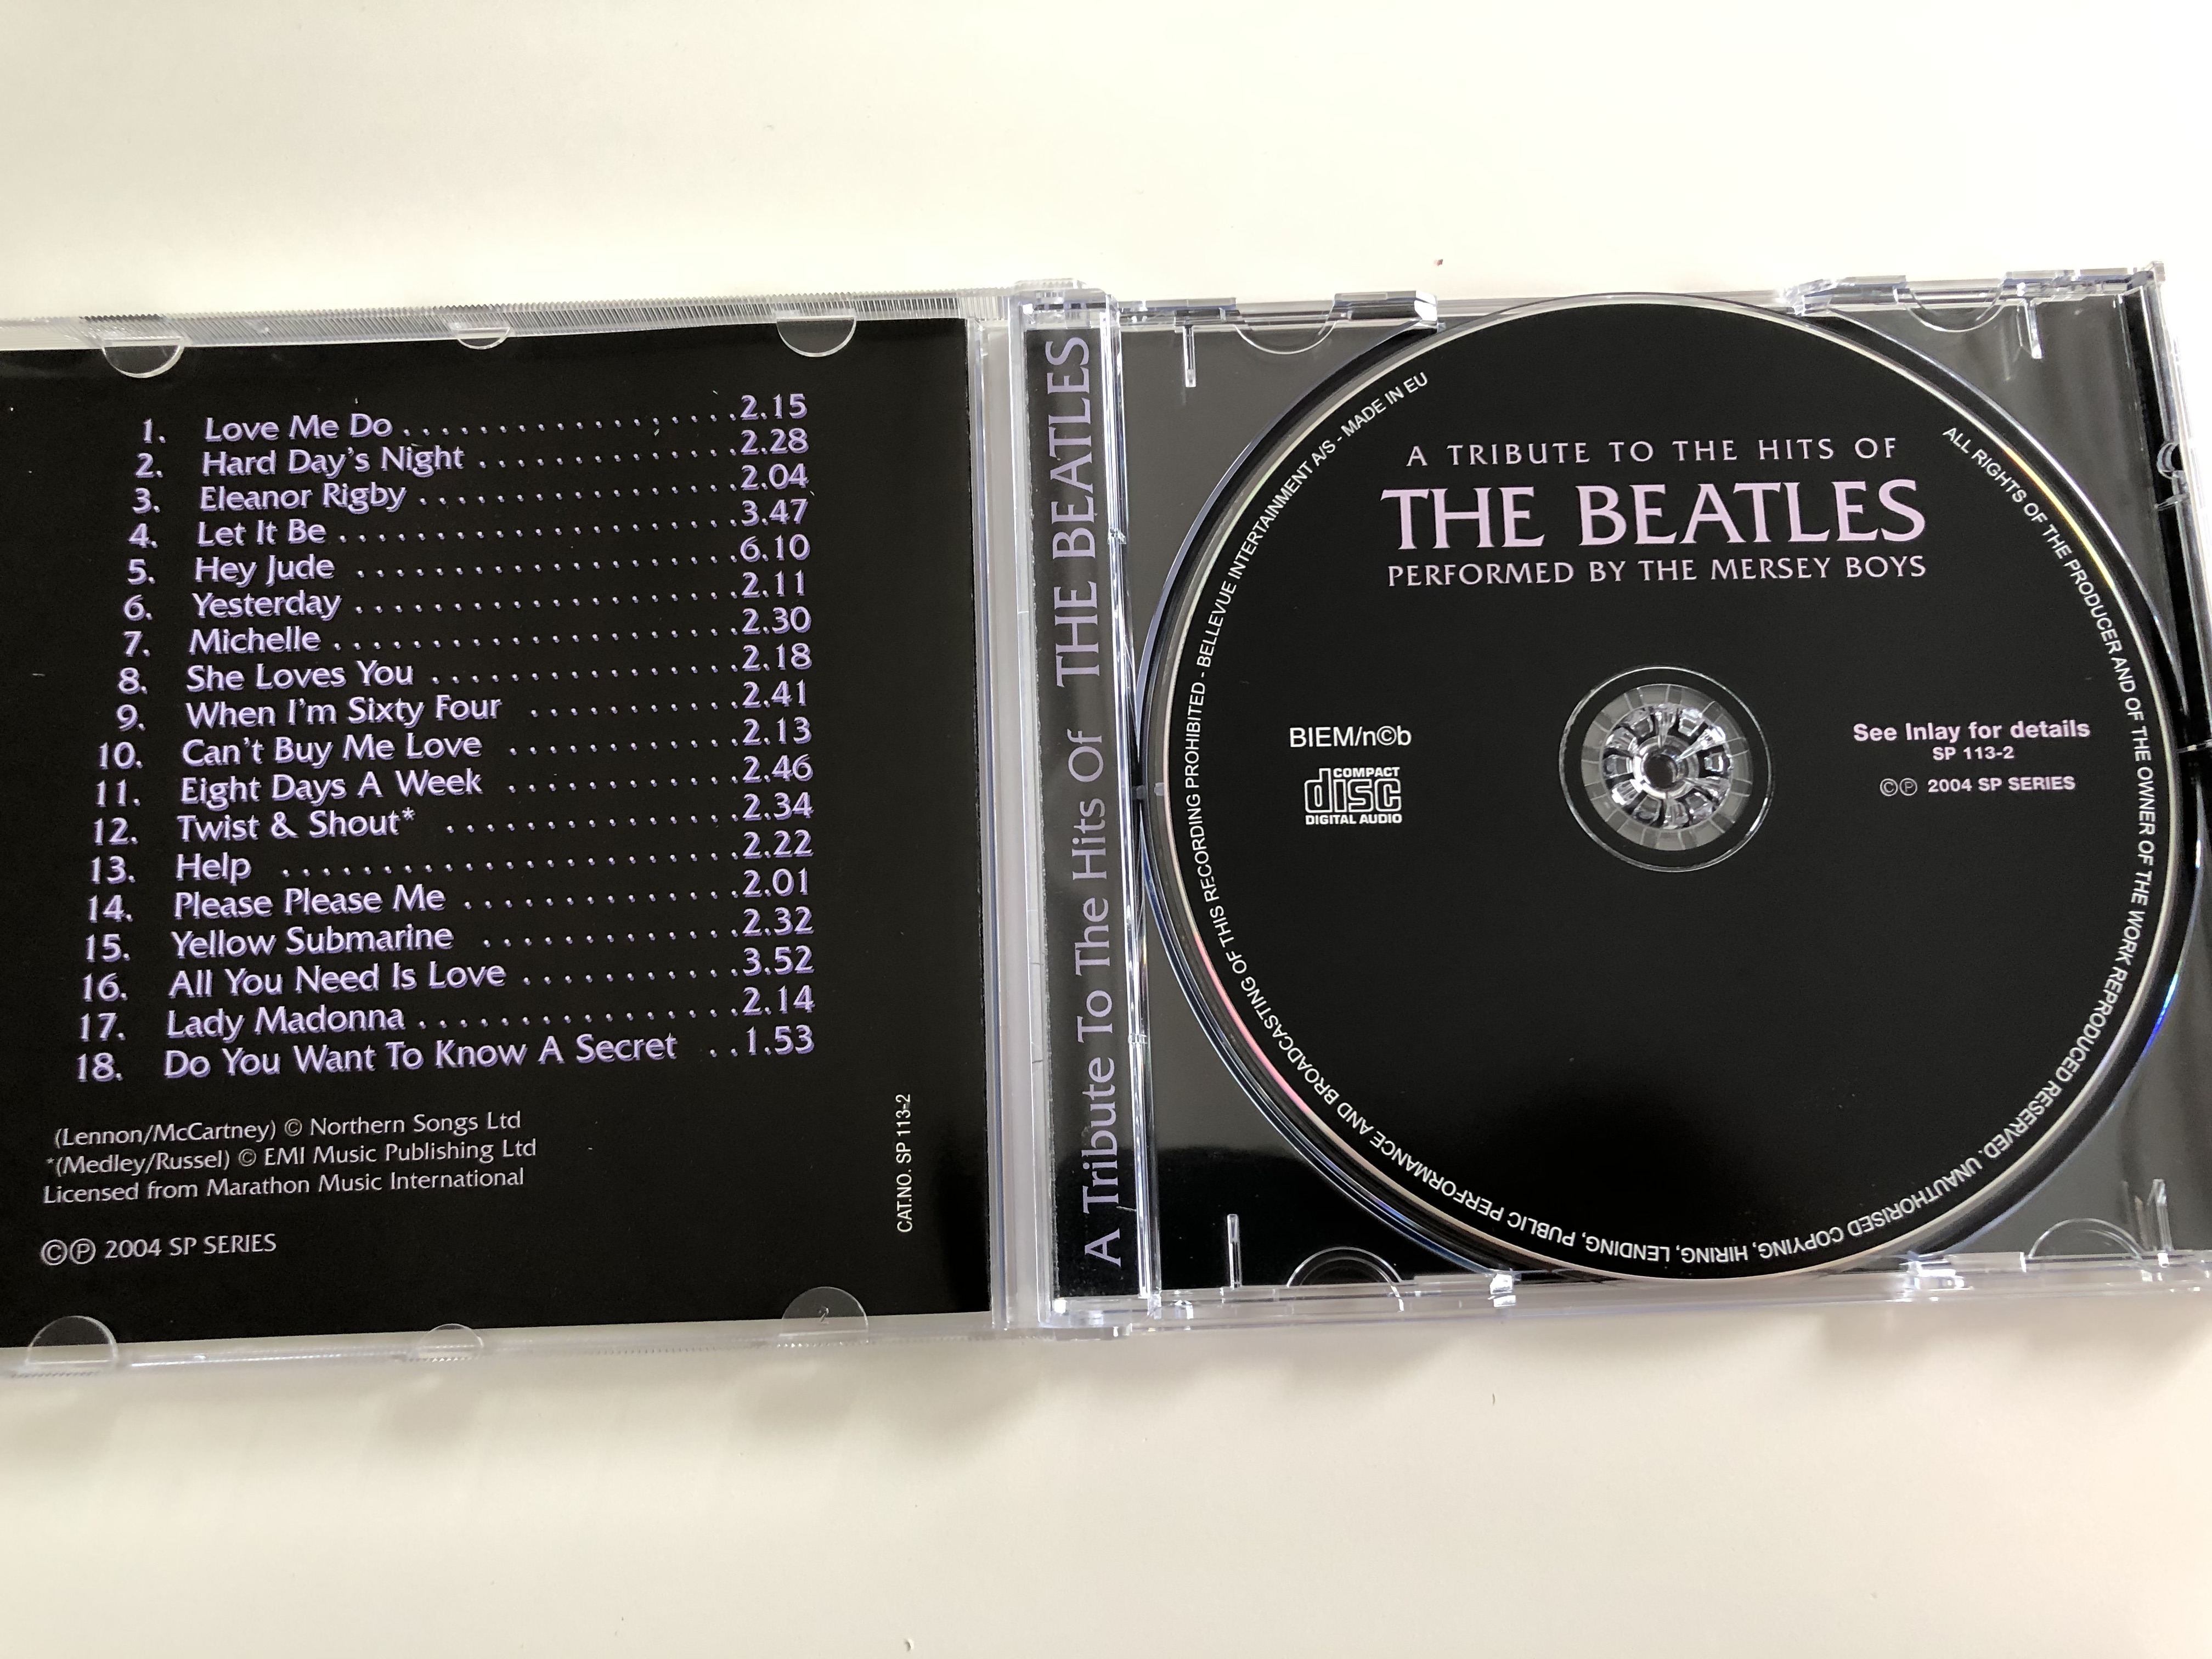 a-tribute-to-the-hits-of-beatles-performed-by-the-mersey-boys-including-yellow-submarine-let-it-be-she-loves-you-hey-jude-and-many-more...-sp-series-audio-cd-2004-sp113-2-2-.jpg